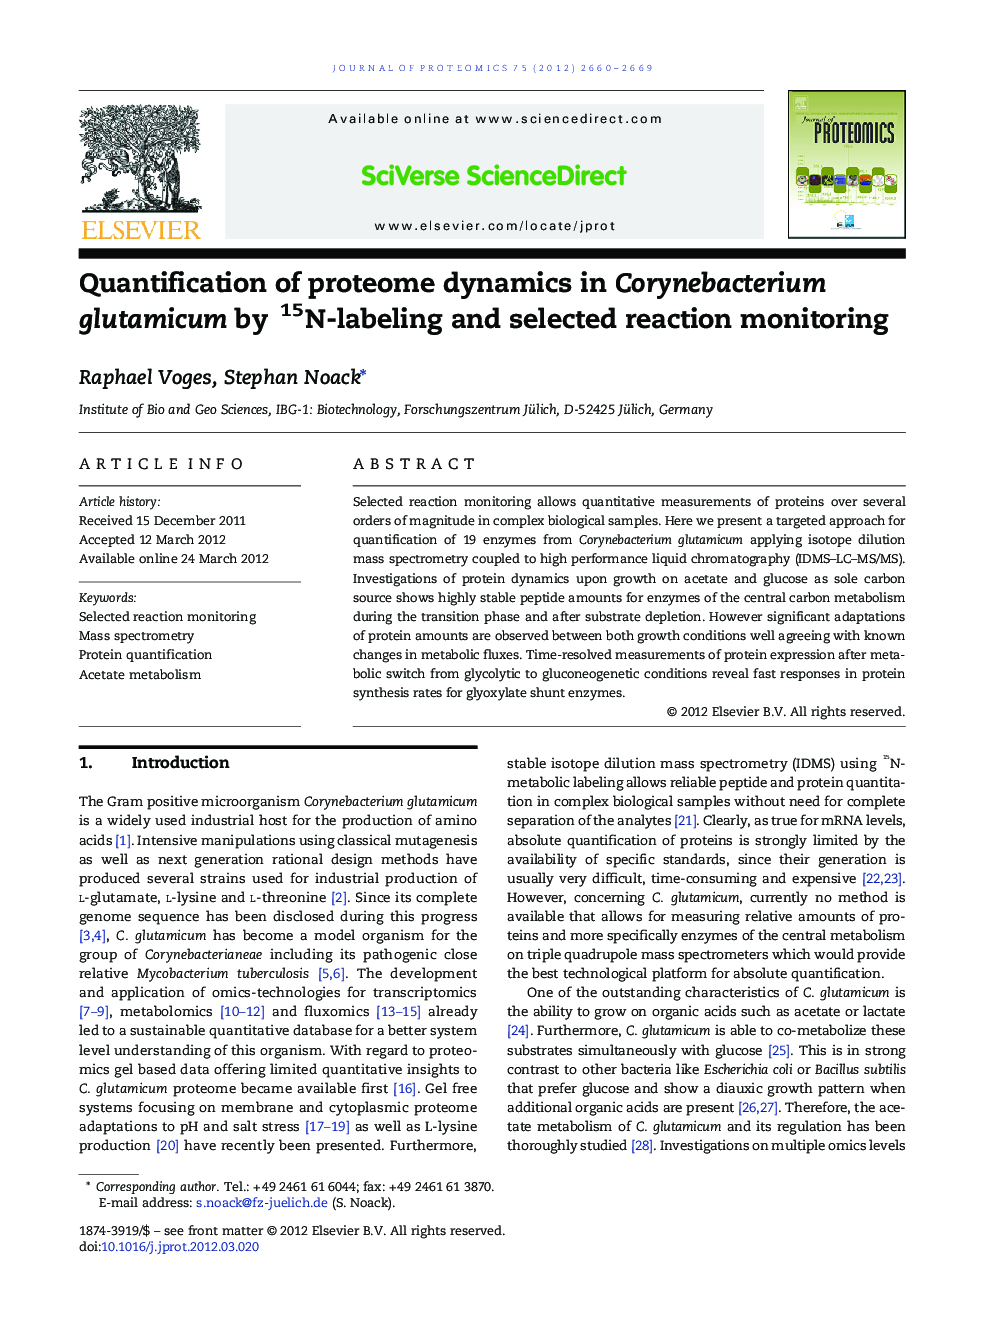 Quantification of proteome dynamics in Corynebacterium glutamicum by 15N-labeling and selected reaction monitoring